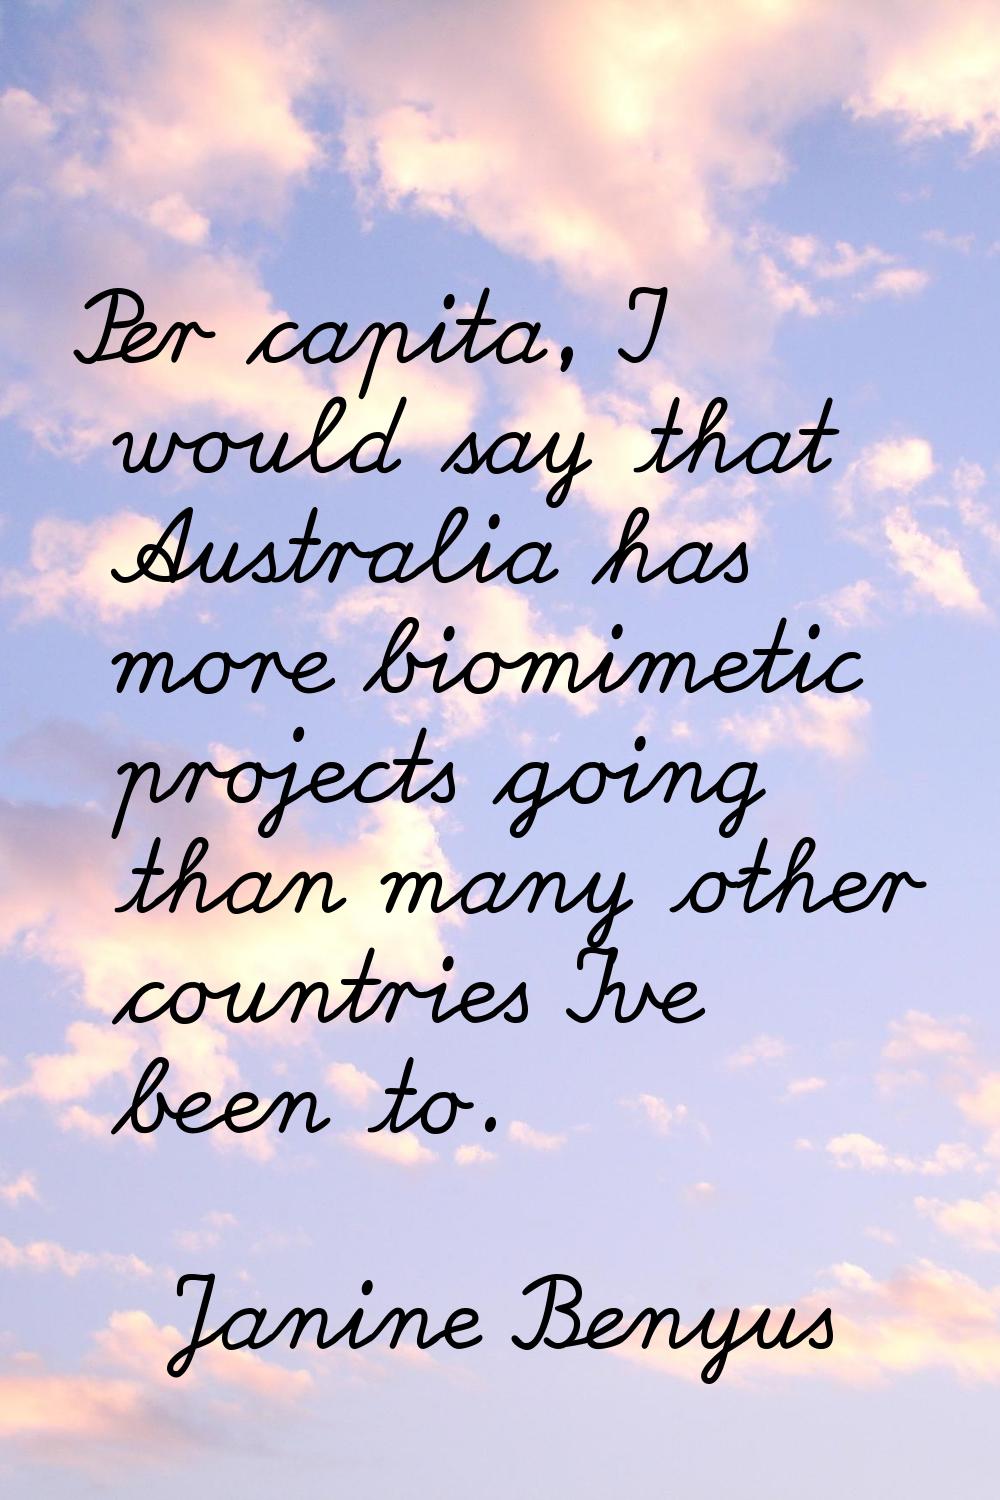 Per capita, I would say that Australia has more biomimetic projects going than many other countries